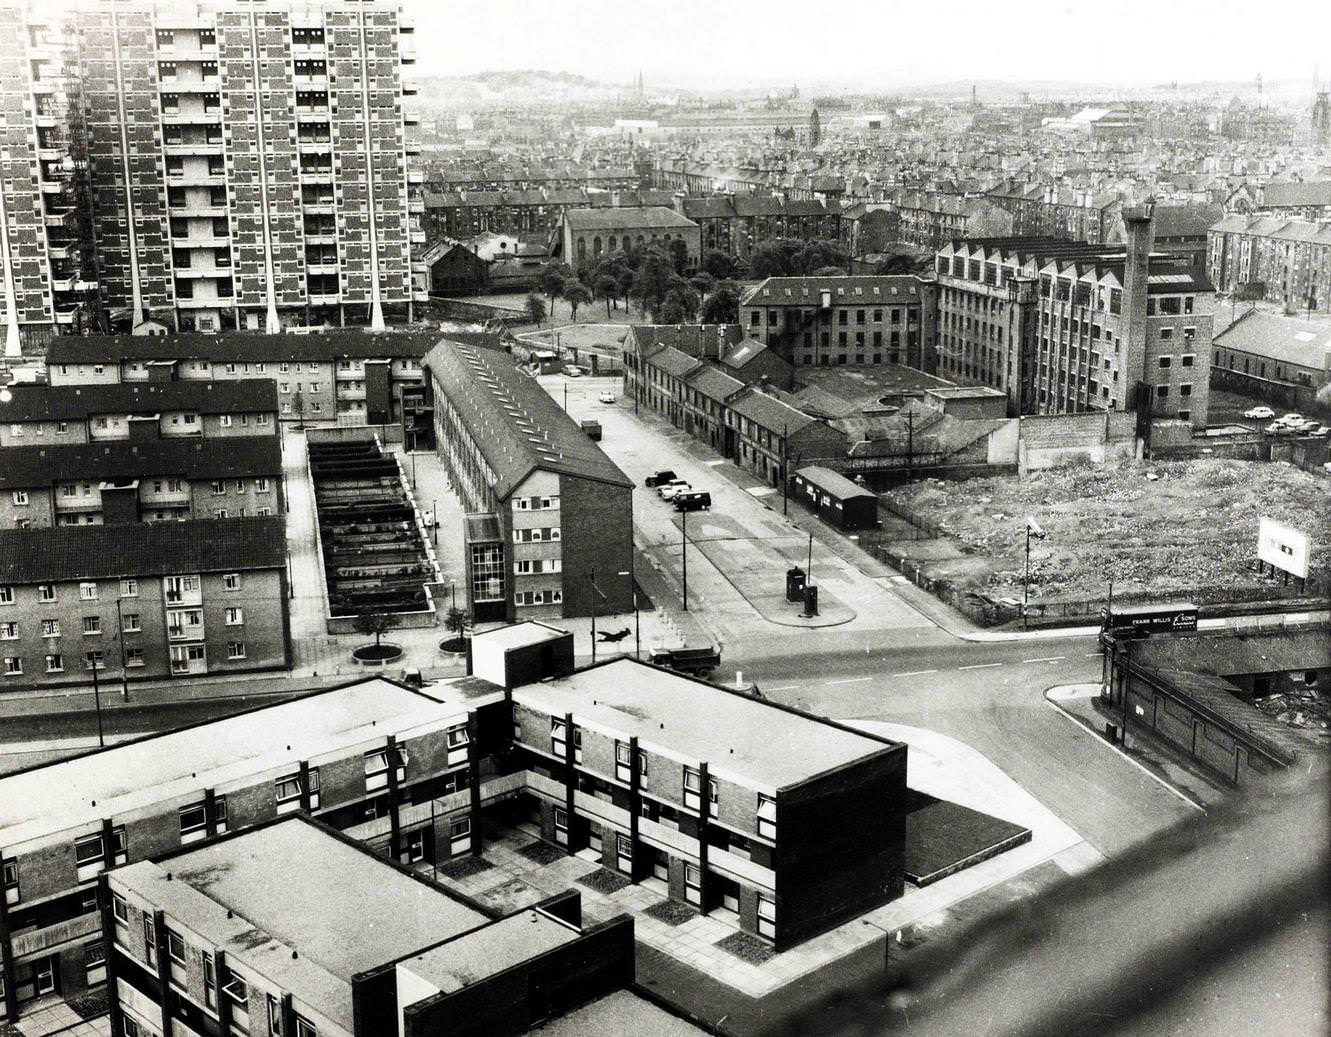 A view of Glasgow, Scotland, looking towards the city centre from the new Gorbals flats, 1964